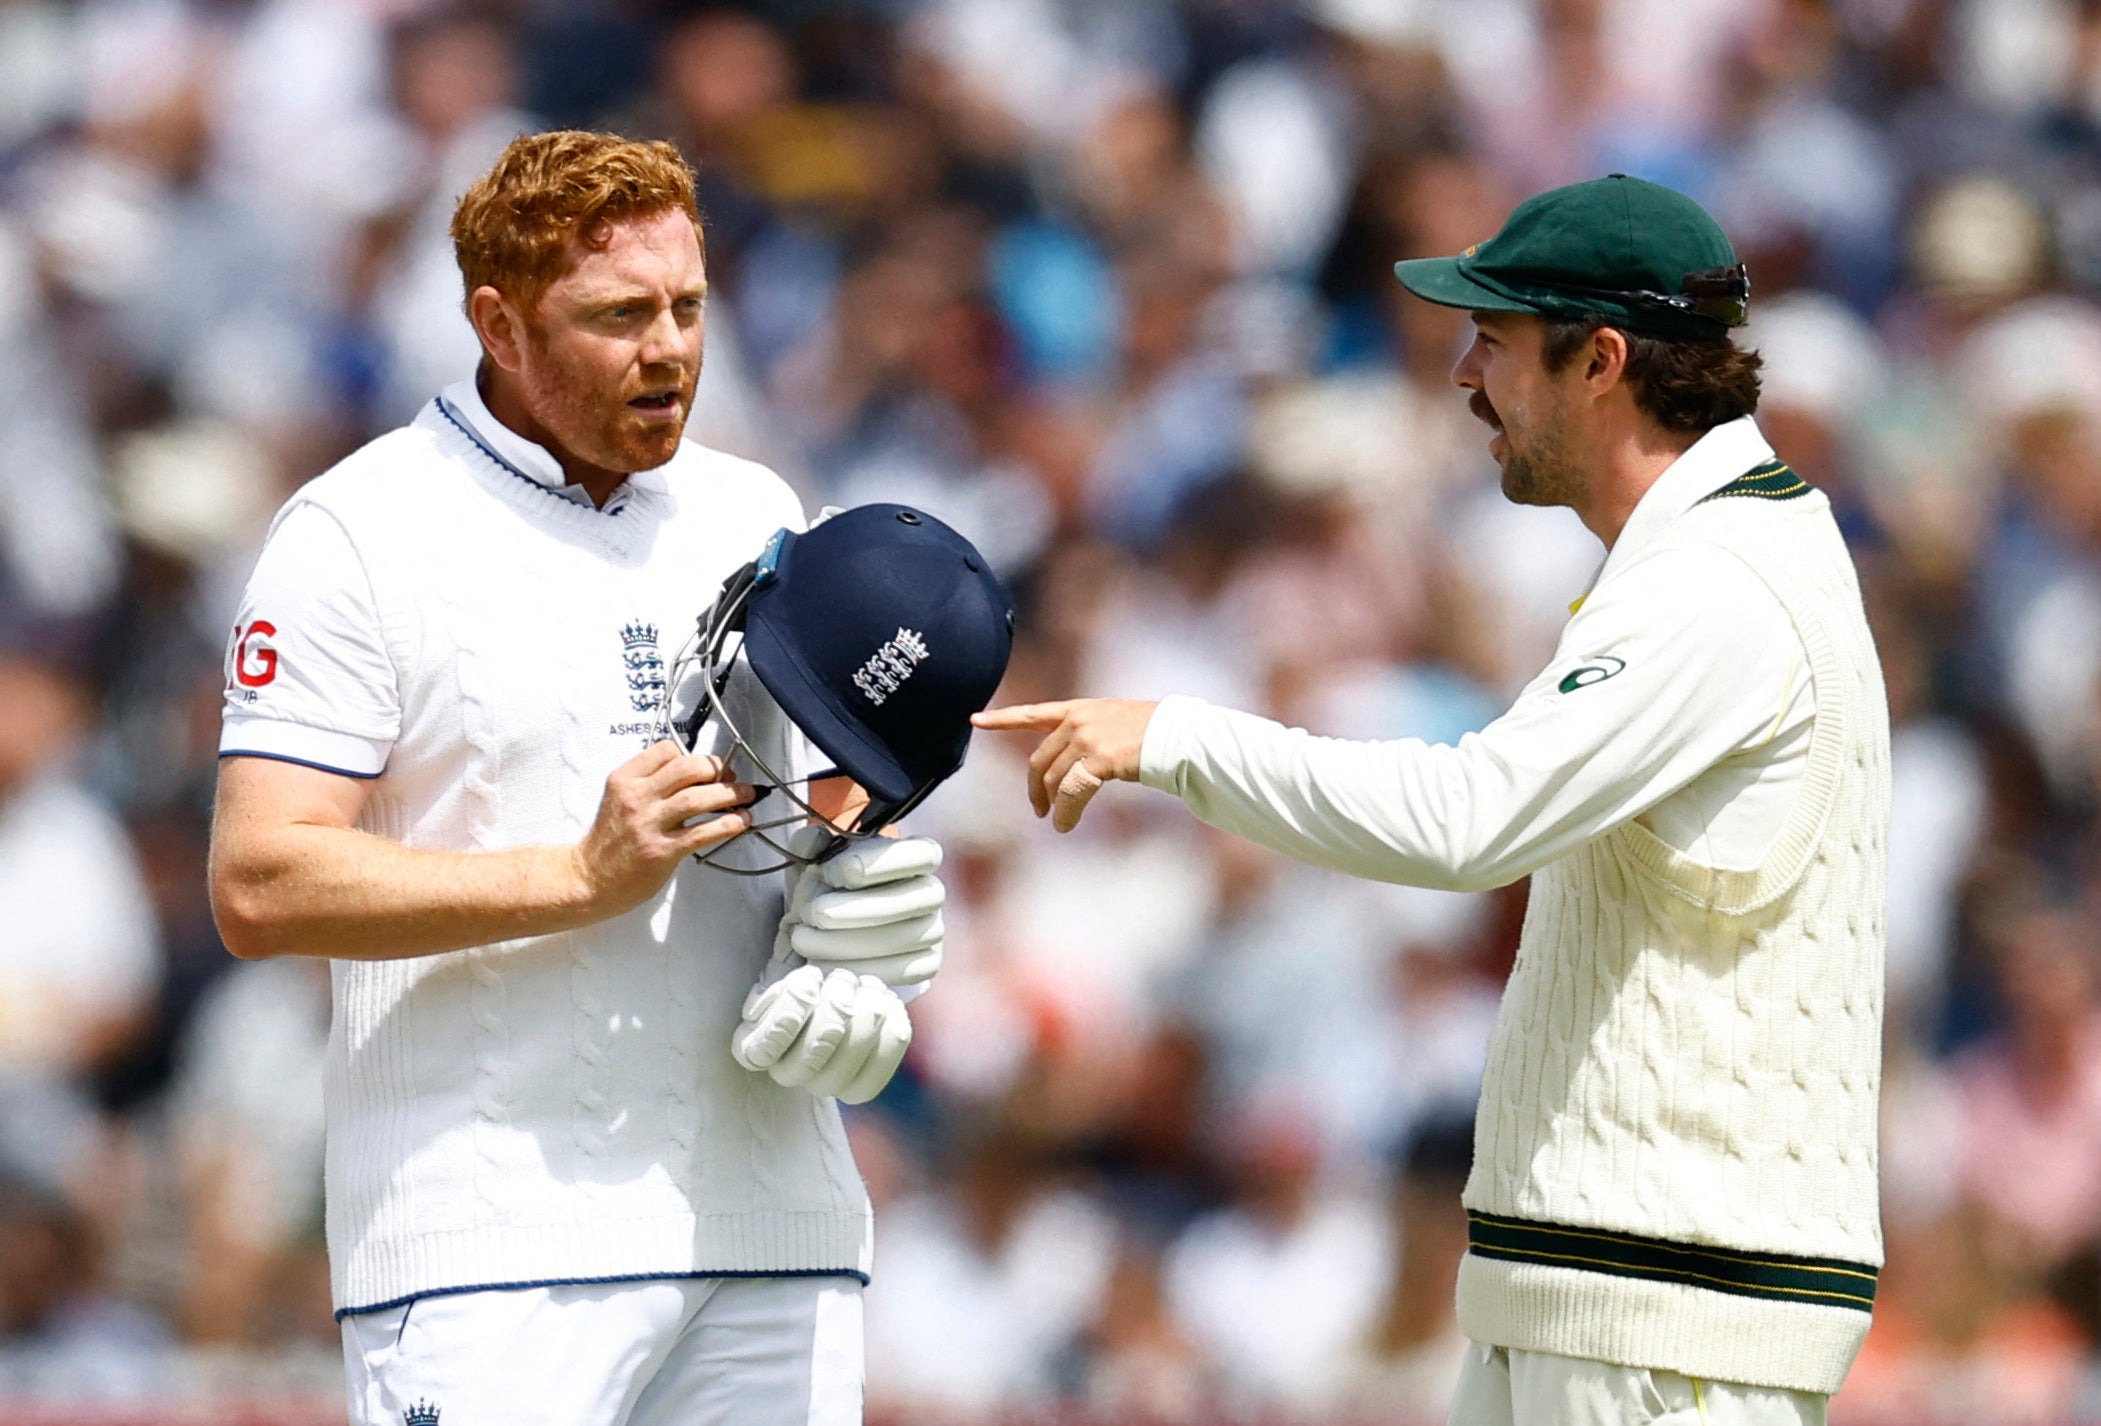 Jonny Bairstow’s controversial dismissal cast a shadow over the second Test